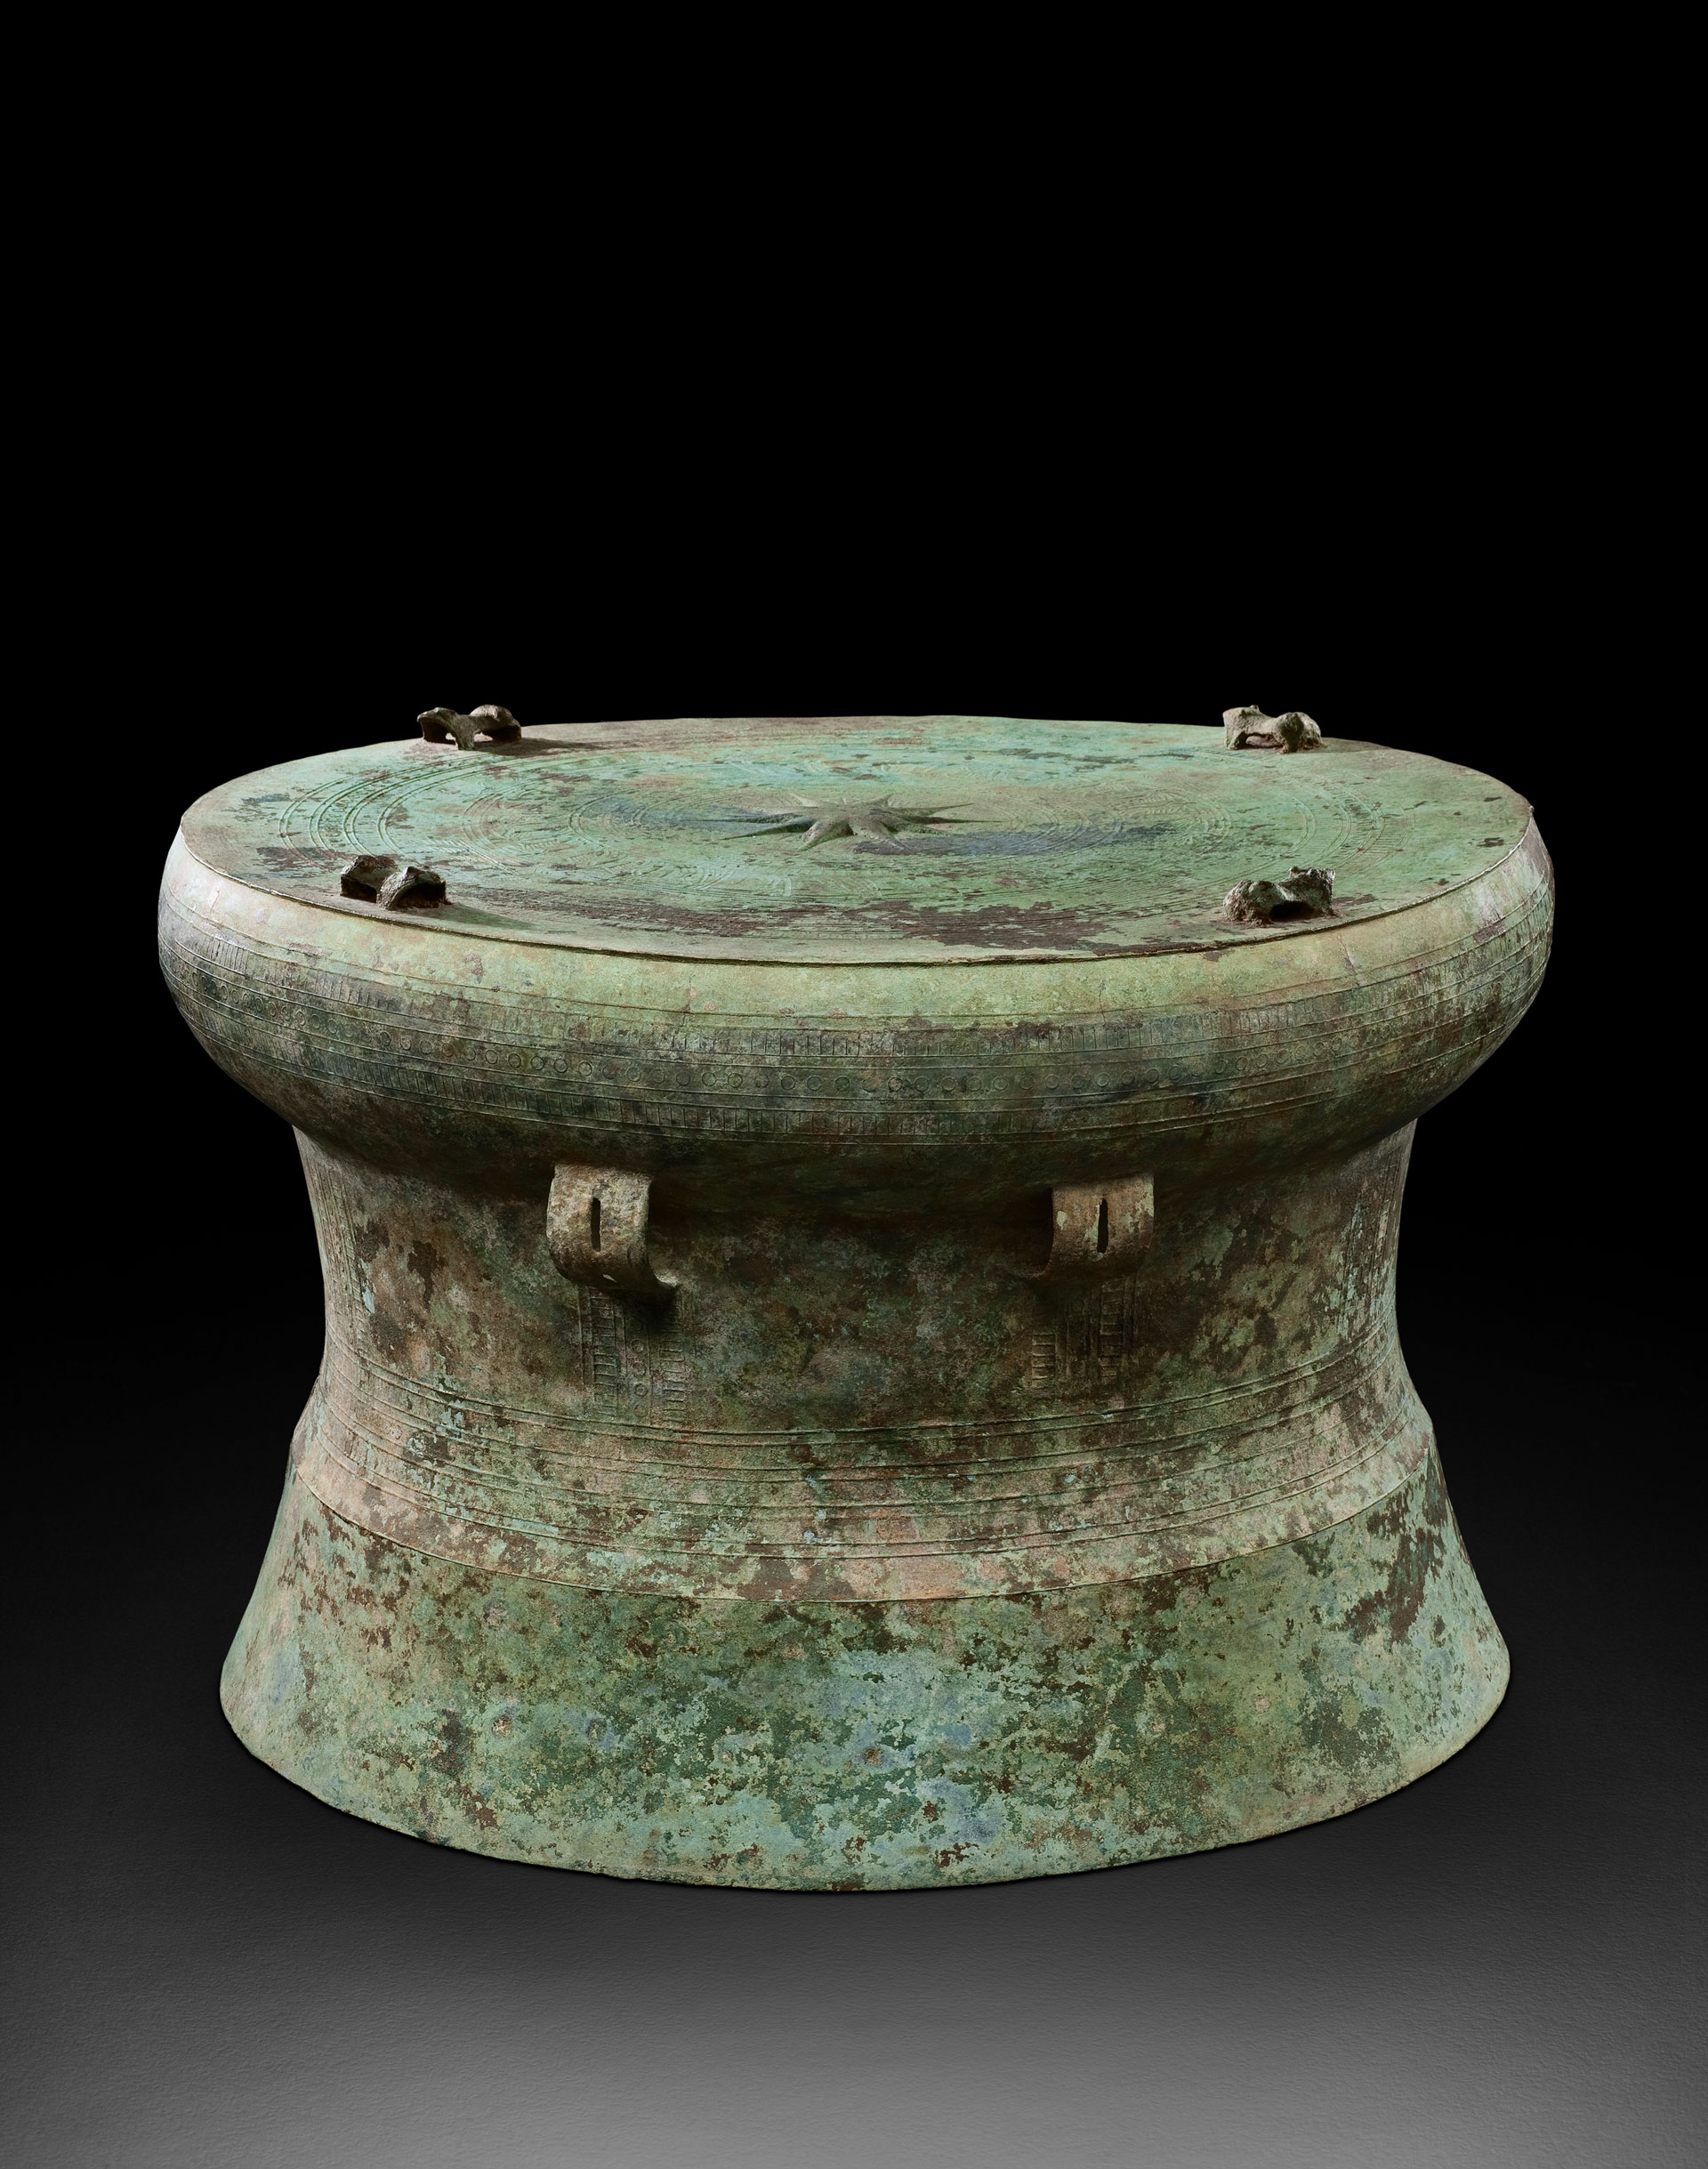 A Đông Sơn Heger I Drum topped by four frogs